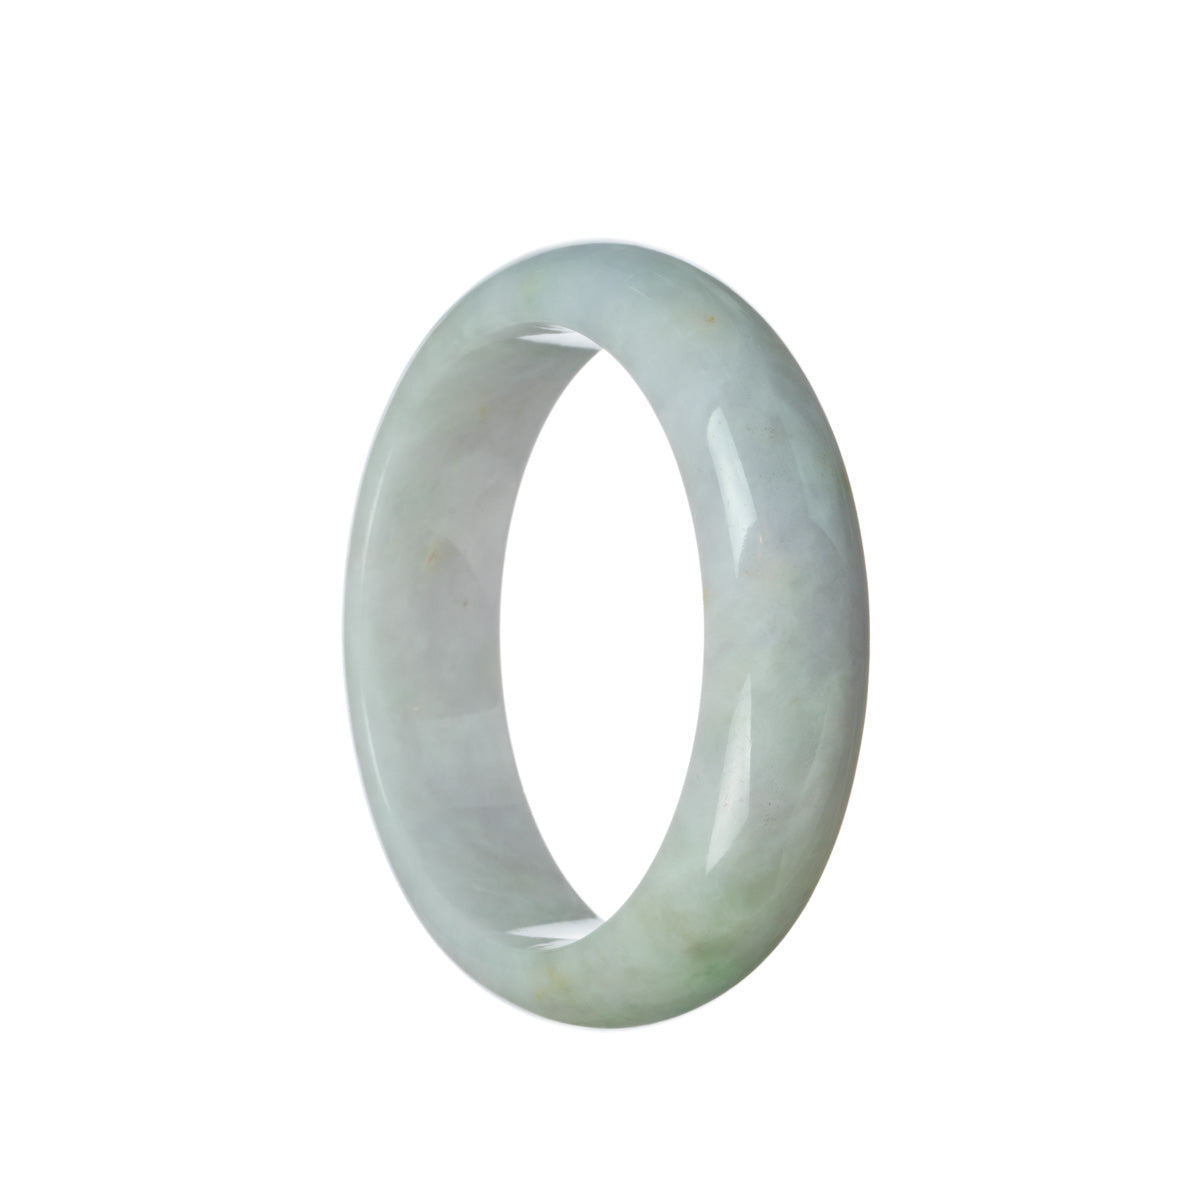 A beautiful pale lavender and apple green jade bracelet in a half moon shape, untreated and natural. Perfect for adding a touch of elegance to any outfit.